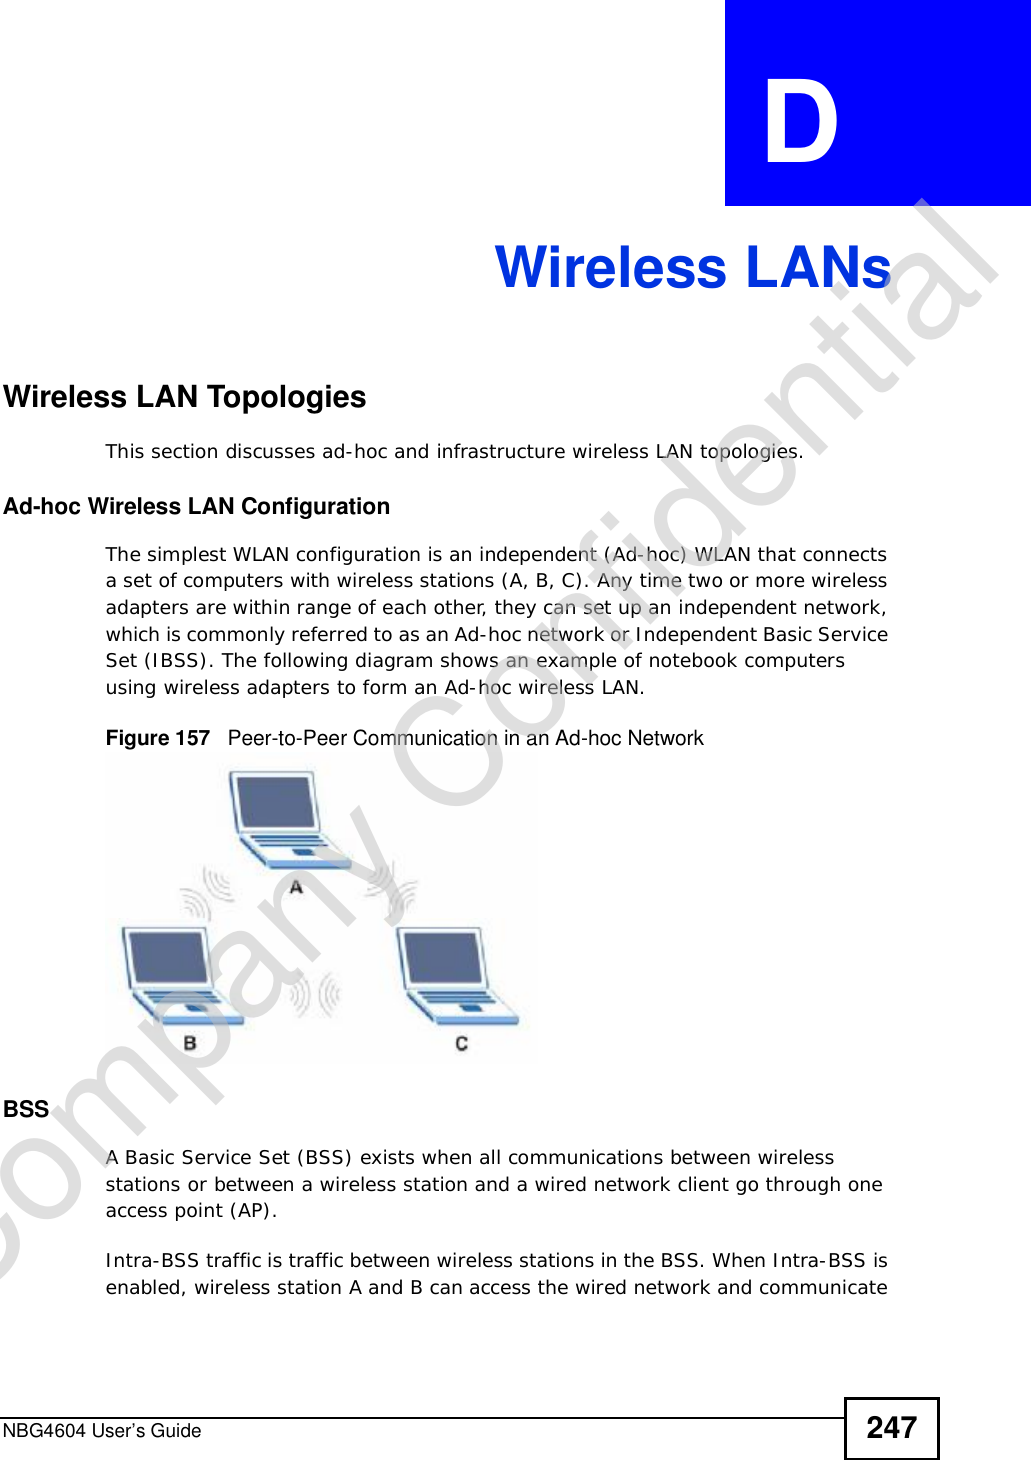 NBG4604 User’s Guide 247APPENDIX  D Wireless LANsWireless LAN TopologiesThis section discusses ad-hoc and infrastructure wireless LAN topologies.Ad-hoc Wireless LAN ConfigurationThe simplest WLAN configuration is an independent (Ad-hoc) WLAN that connects a set of computers with wireless stations (A, B, C). Any time two or more wireless adapters are within range of each other, they can set up an independent network, which is commonly referred to as an Ad-hoc network or Independent Basic Service Set (IBSS). The following diagram shows an example of notebook computers using wireless adapters to form an Ad-hoc wireless LAN. Figure 157   Peer-to-Peer Communication in an Ad-hoc NetworkBSSA Basic Service Set (BSS) exists when all communications between wireless stations or between a wireless station and a wired network client go through one access point (AP). Intra-BSS traffic is traffic between wireless stations in the BSS. When Intra-BSS is enabled, wireless station A and B can access the wired network and communicate Company Confidential